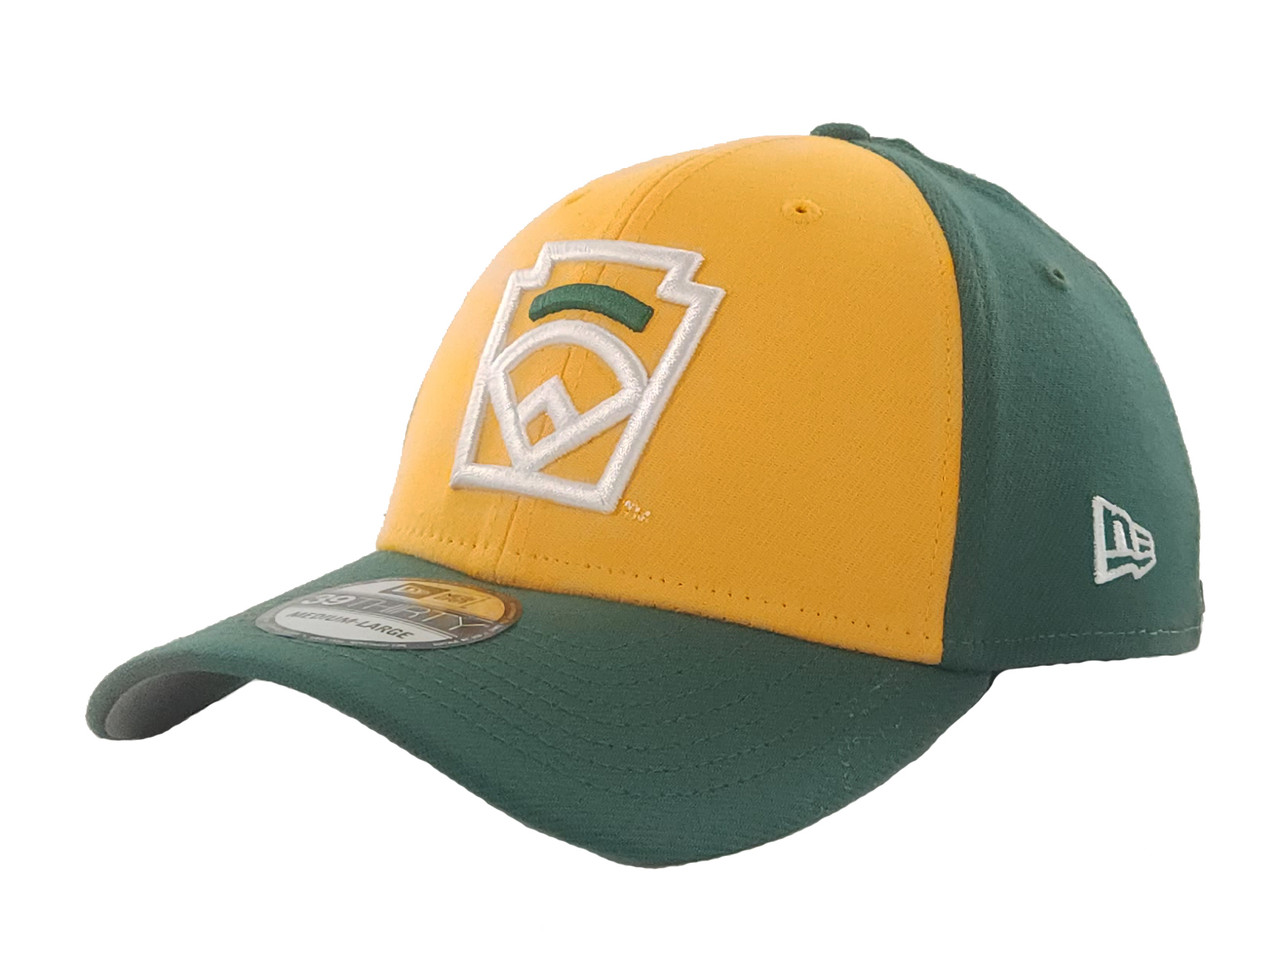 MLB Youth The League Oakland Athletics 9Forty Adjustable Cap